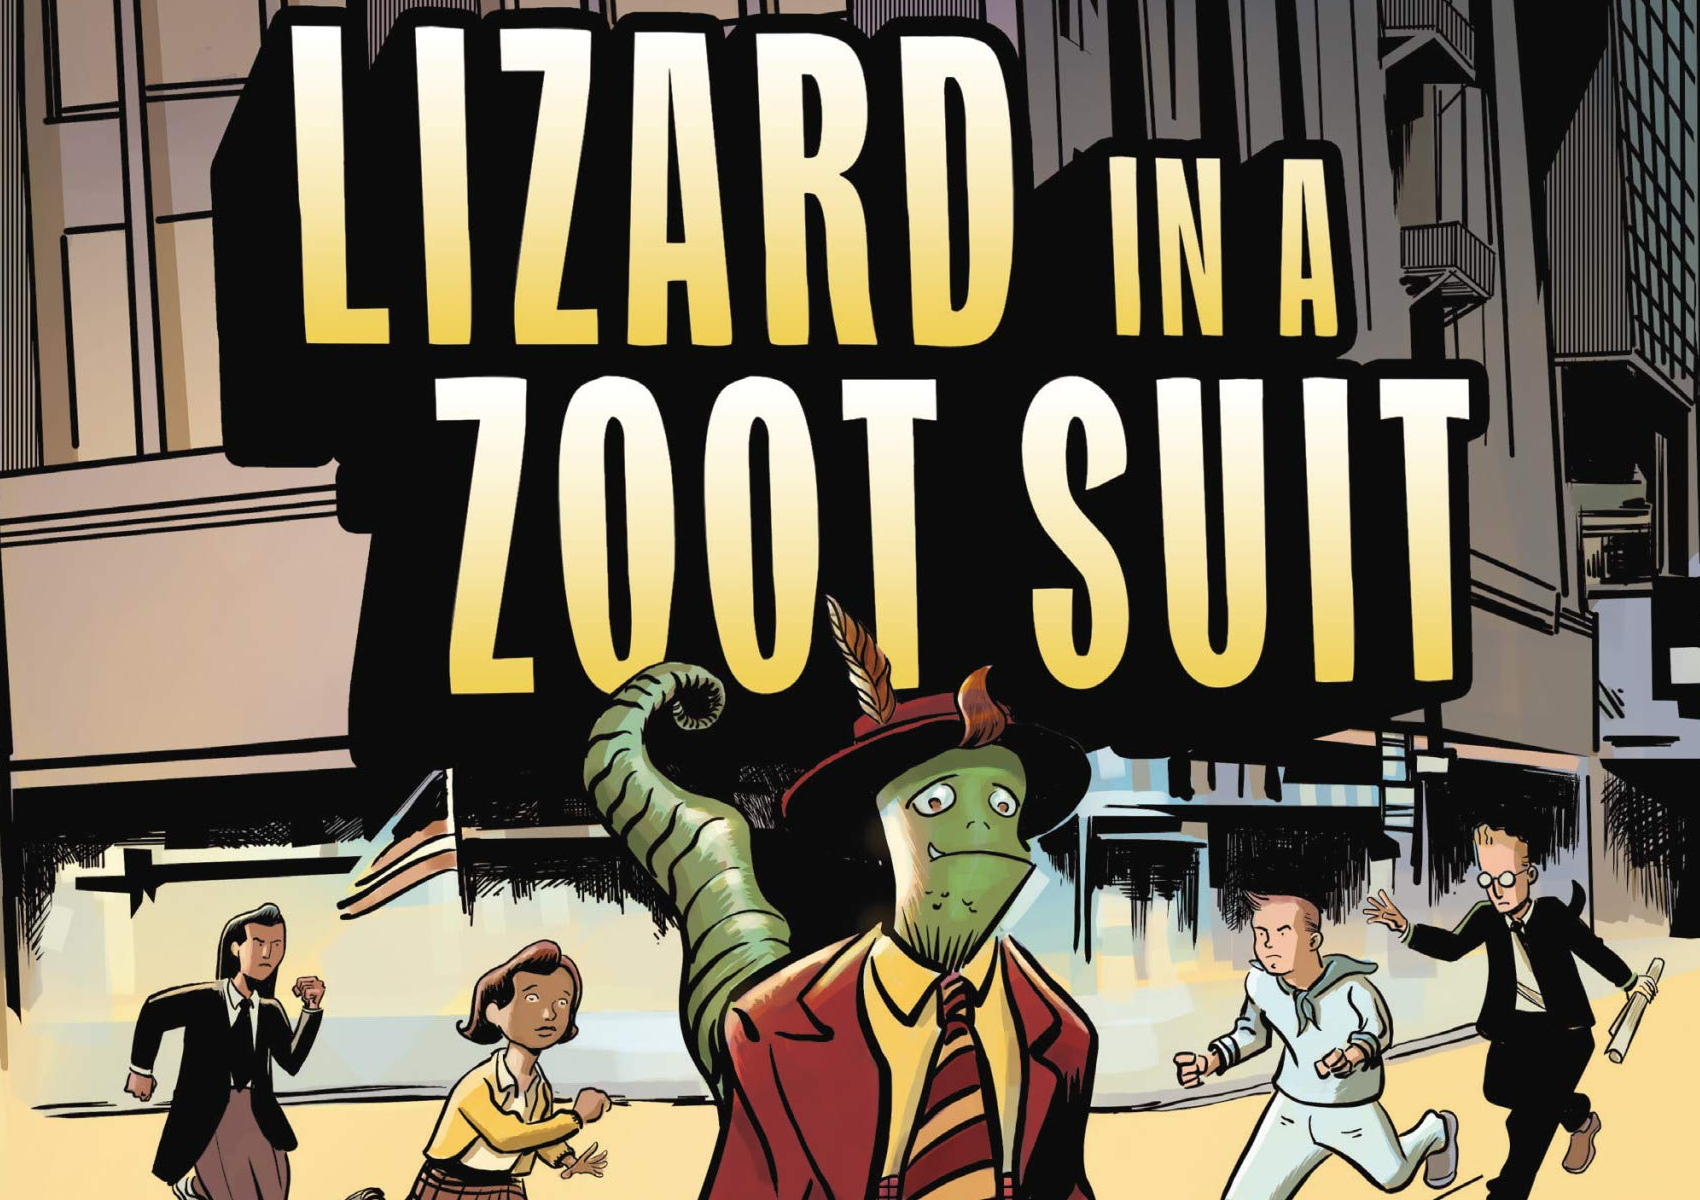 'Lizard in a Zoot Suit' author Marco Finnegan discusses history, writing YA, and cool threads